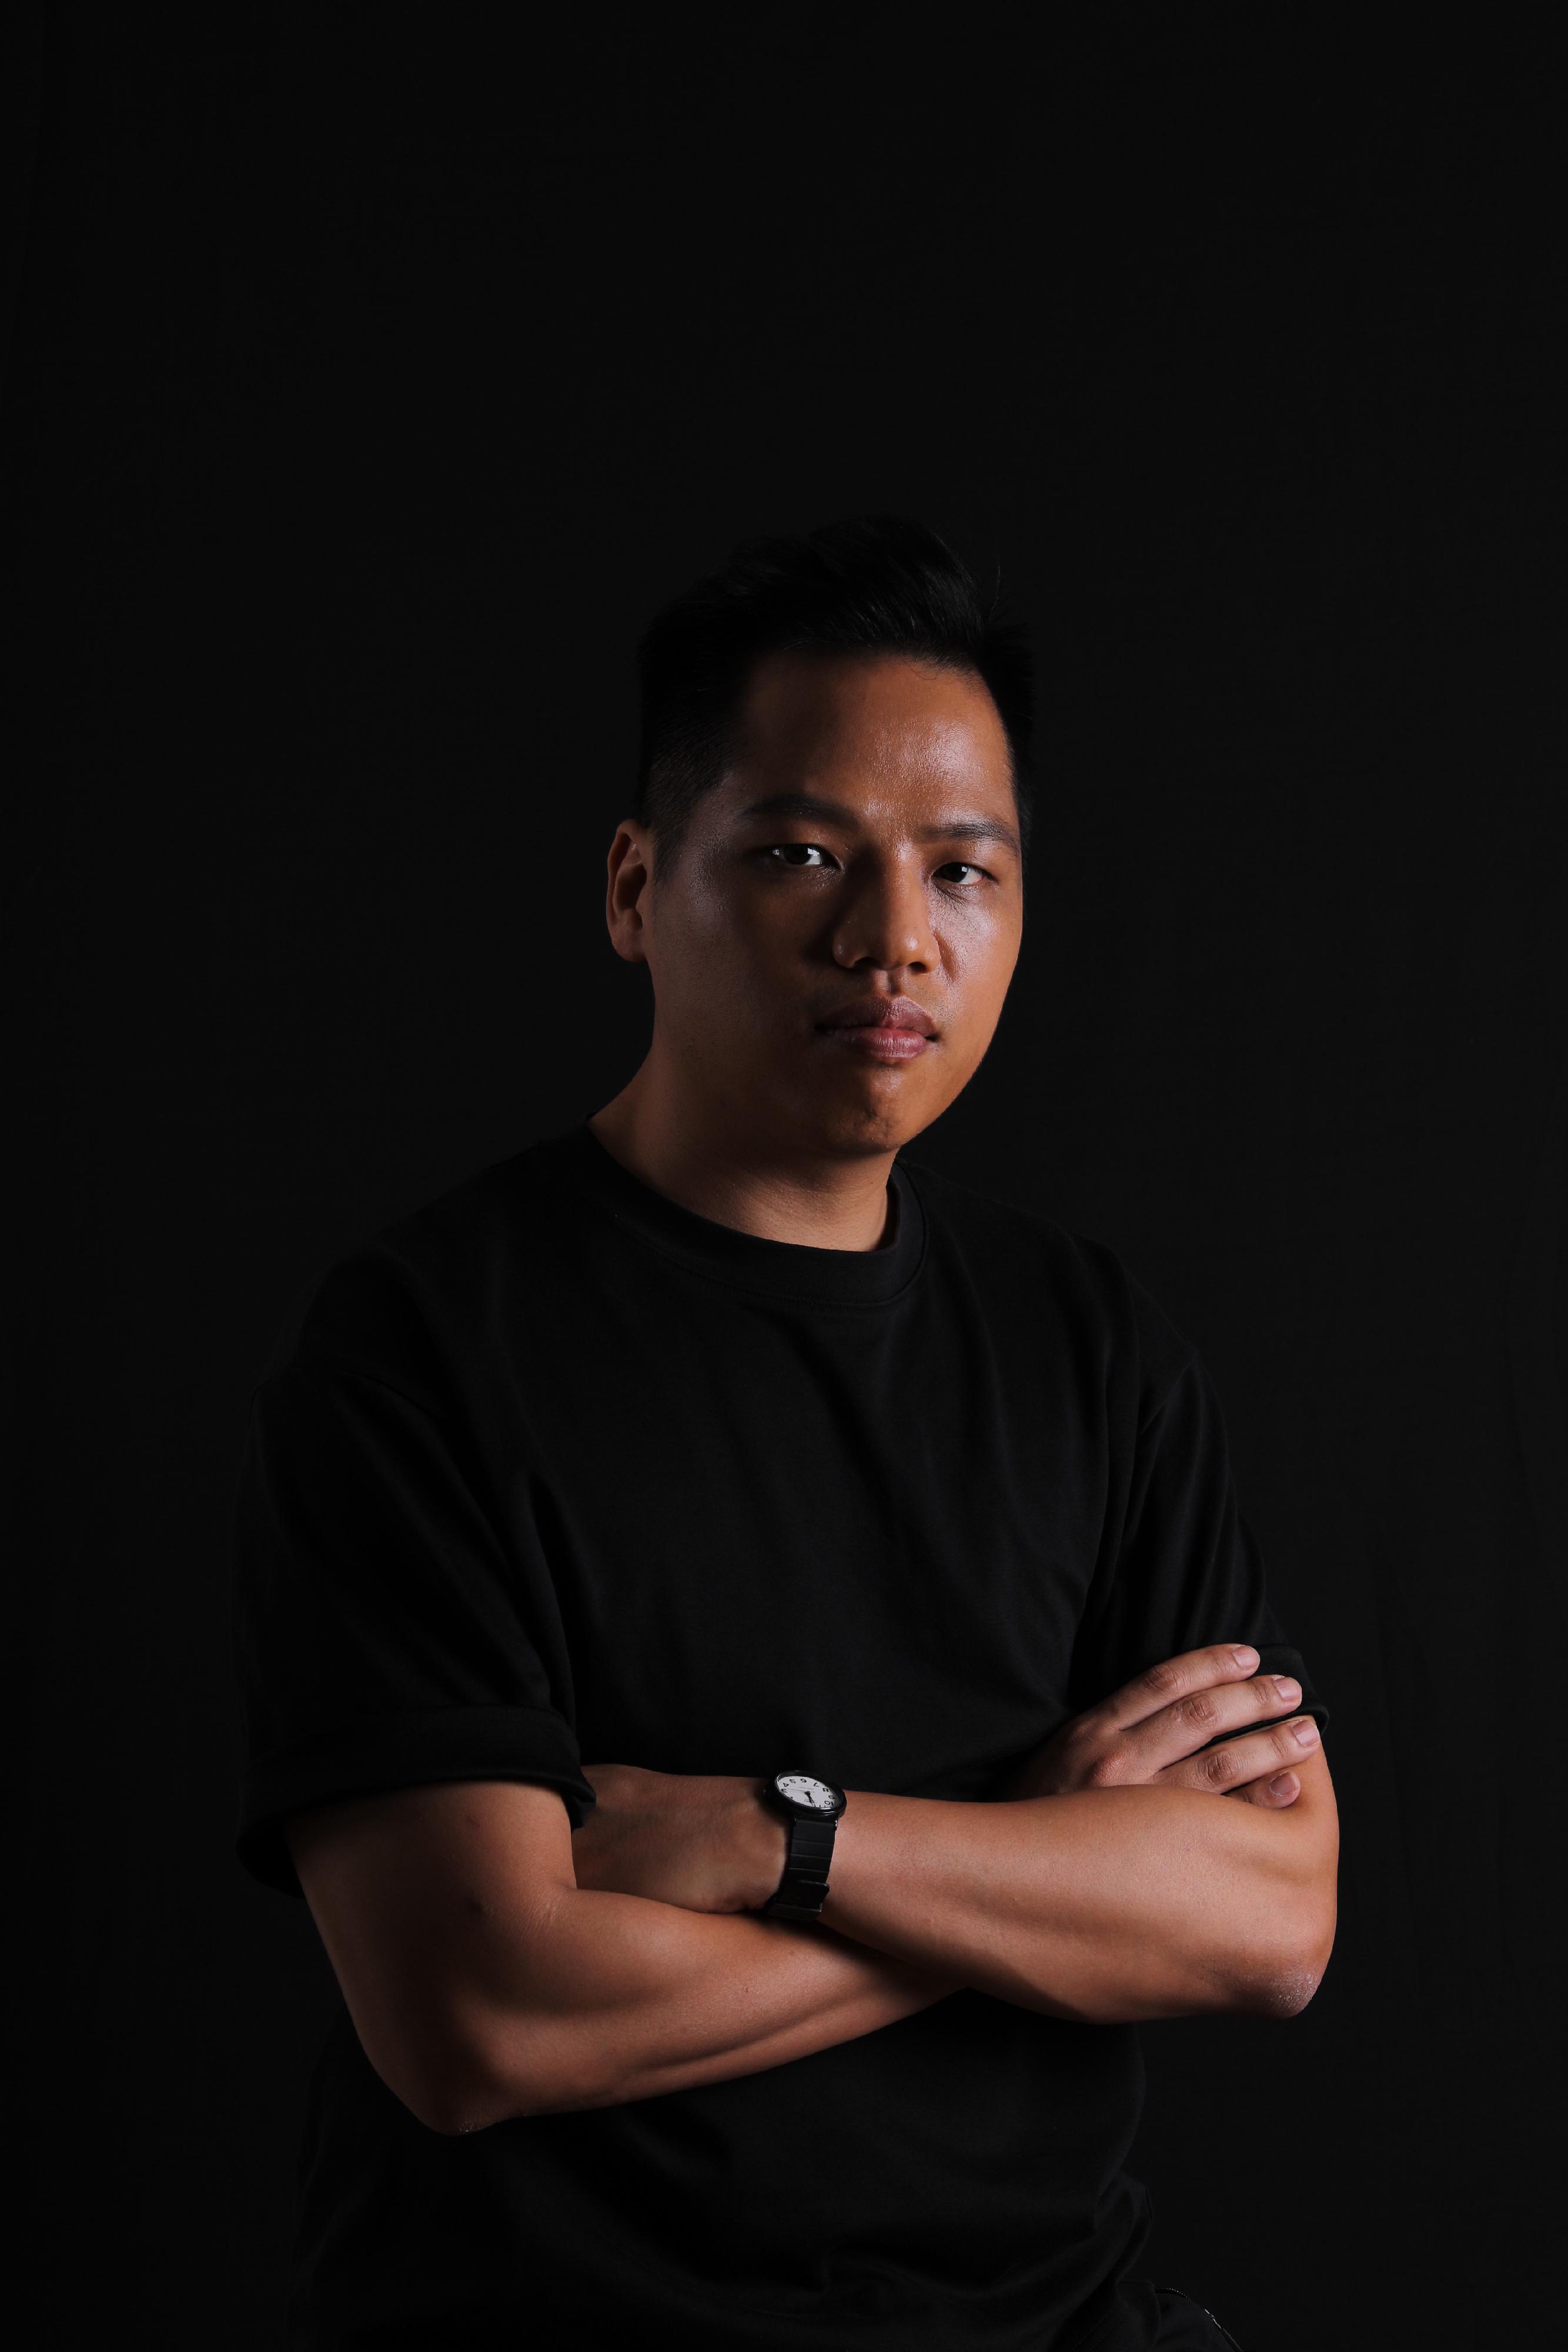 Multi-arts production, "HACK", created by media artist GayBird and theatre director Ata Wong, will be held from November 4 to 6 at the Studio Theatre of the Hong Kong Cultural Centre. Photo shows Wong, who will provide the narrative in the shows through the bodies and movements of the performers.